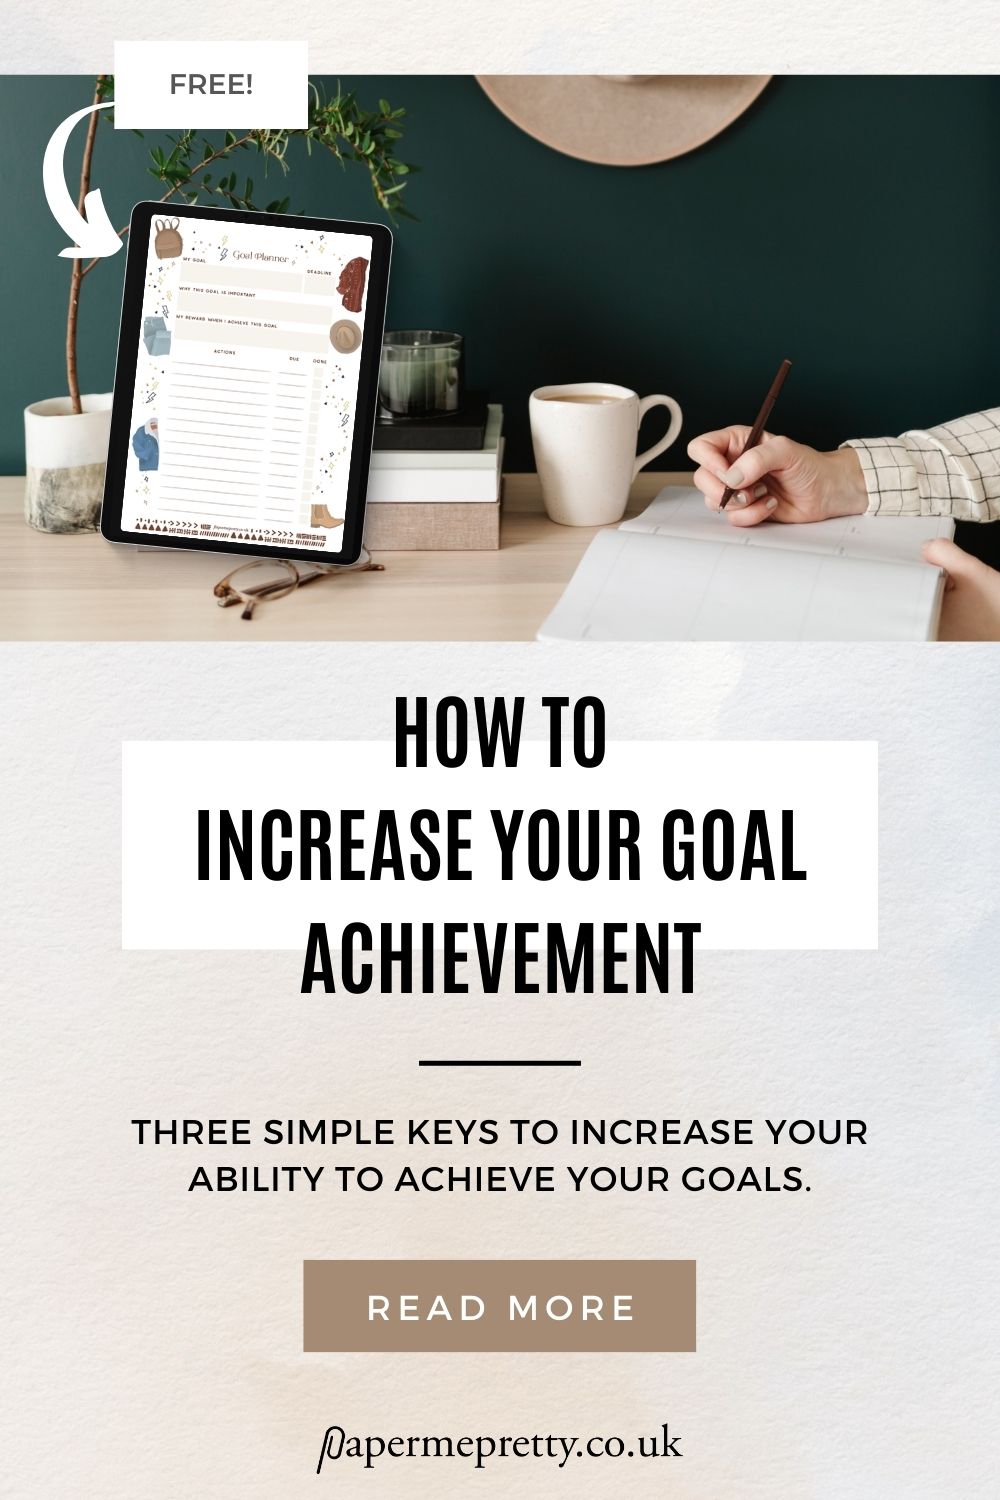 Three simple keys to increase your ability to achieve your goals. Discover how to achieve your goals faster in this post and get a free goal planner too!